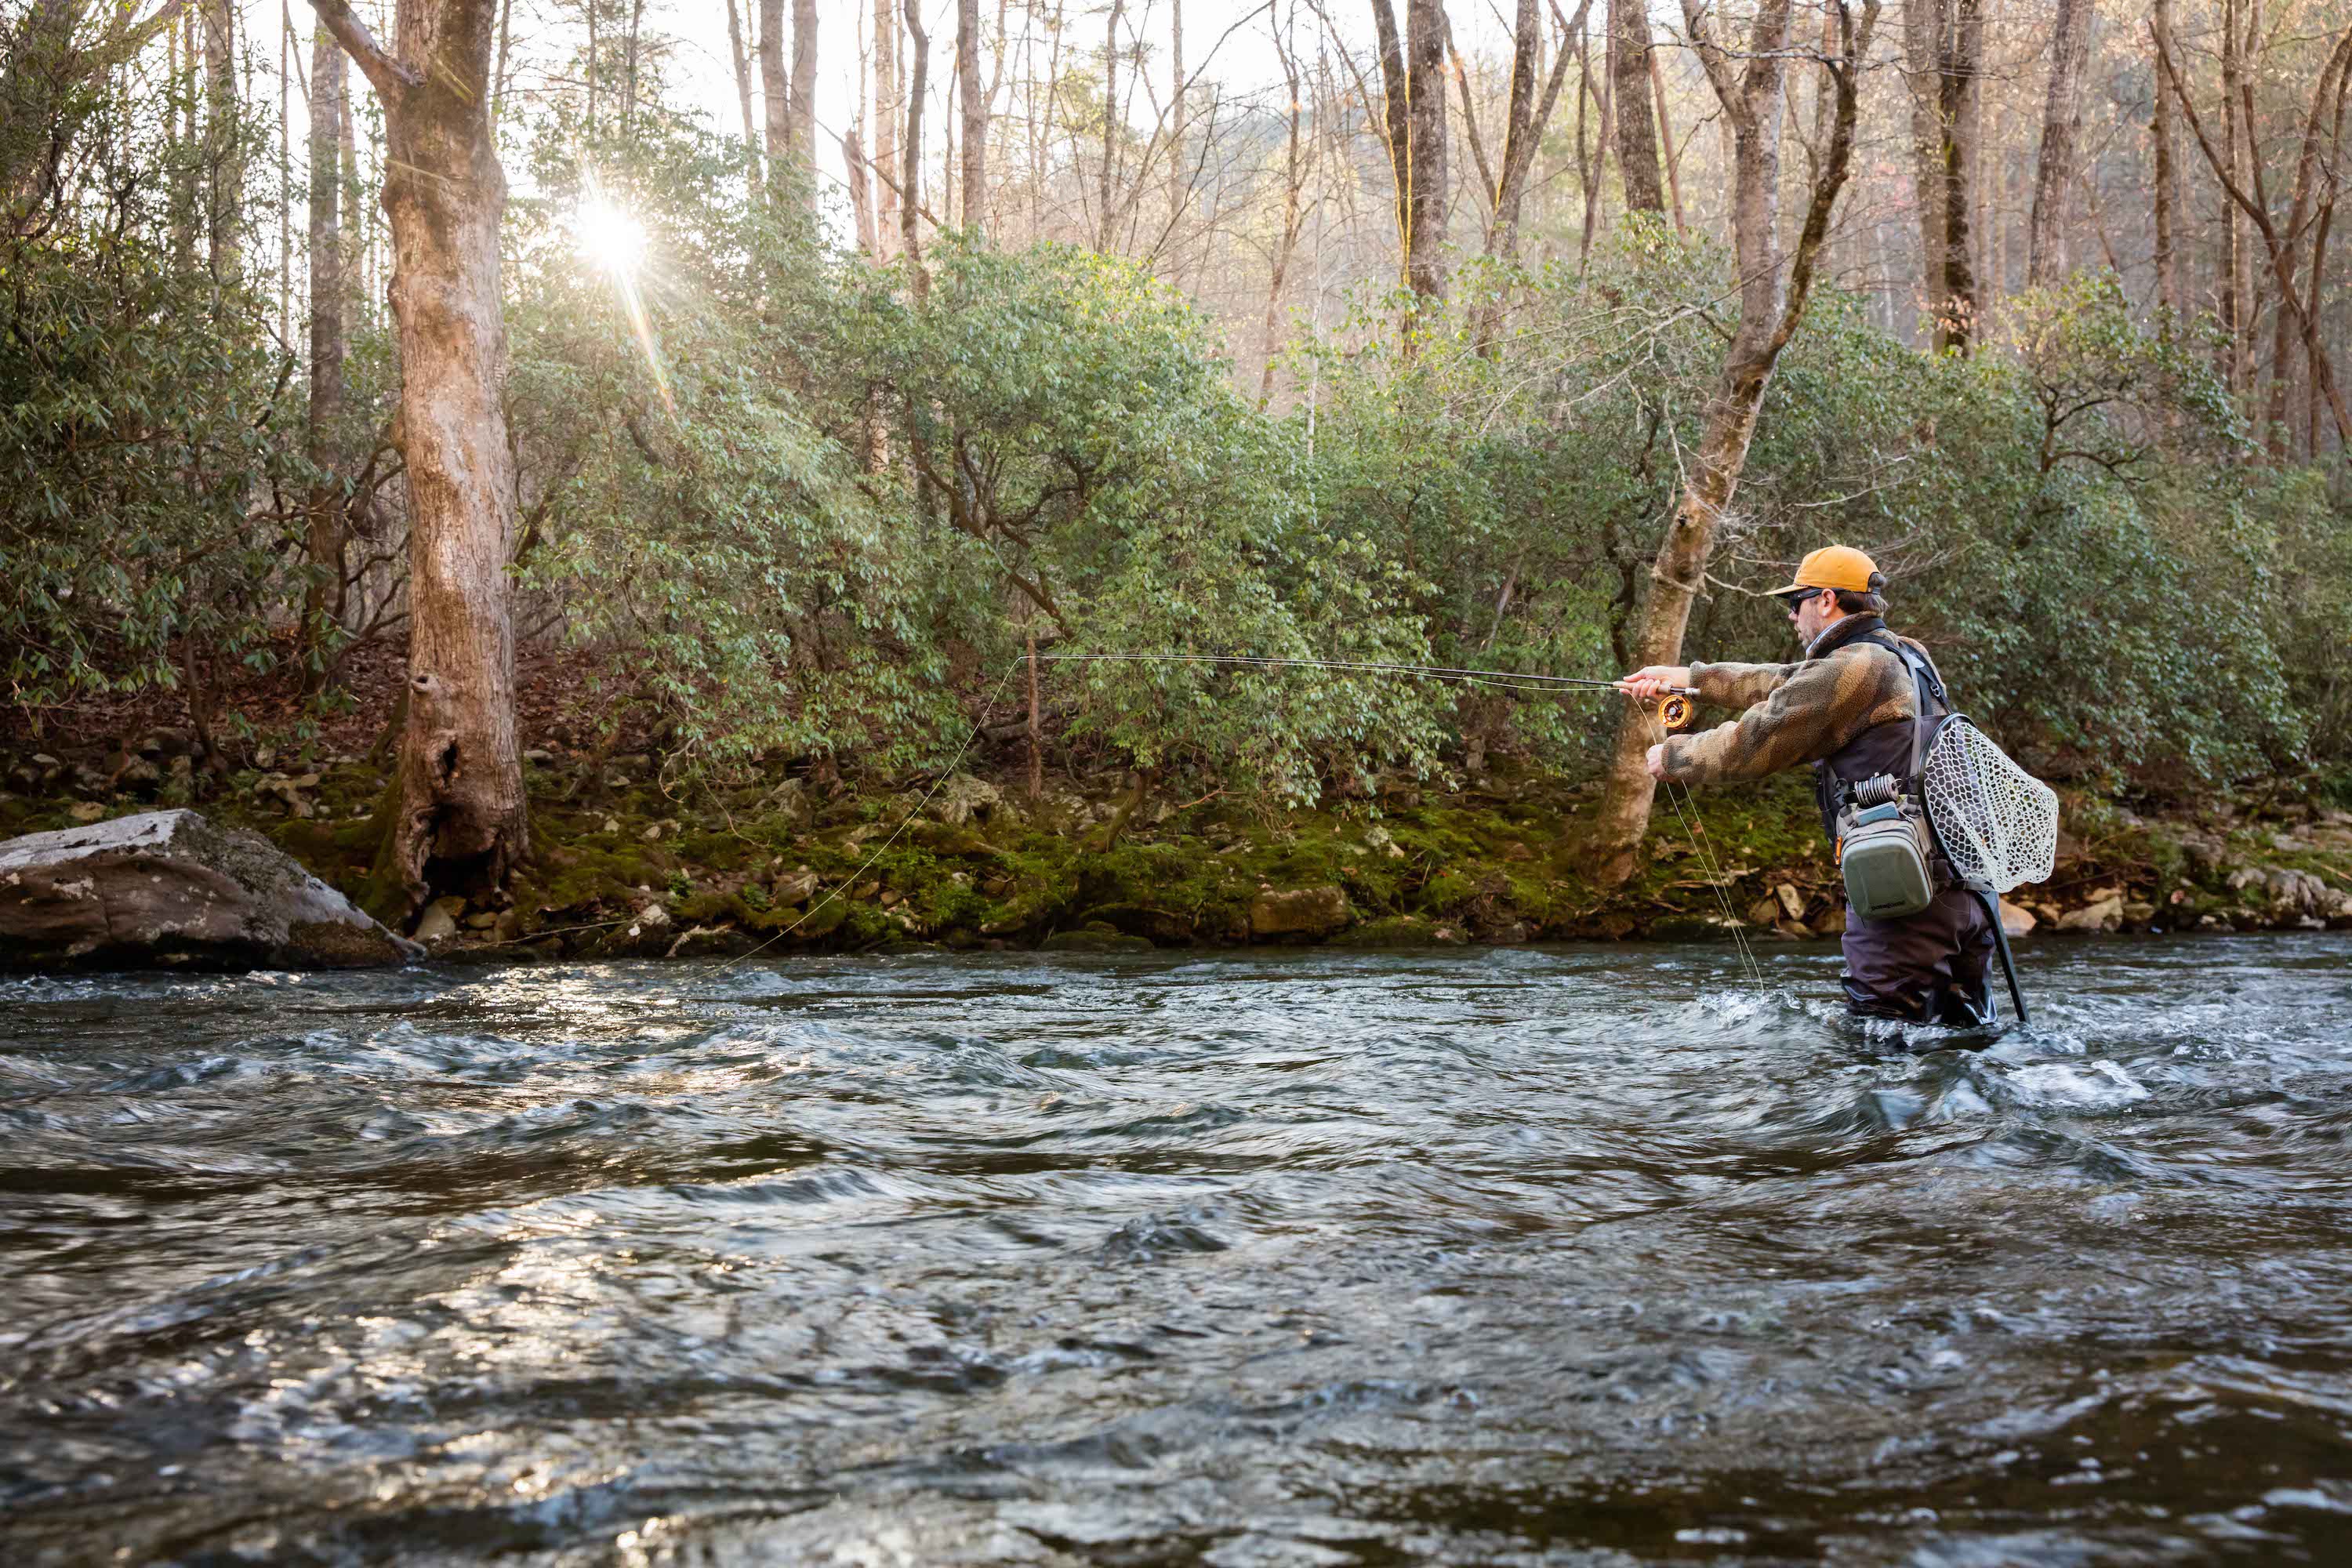 The Women's Fly-Fishing Gear We Loved This Fall